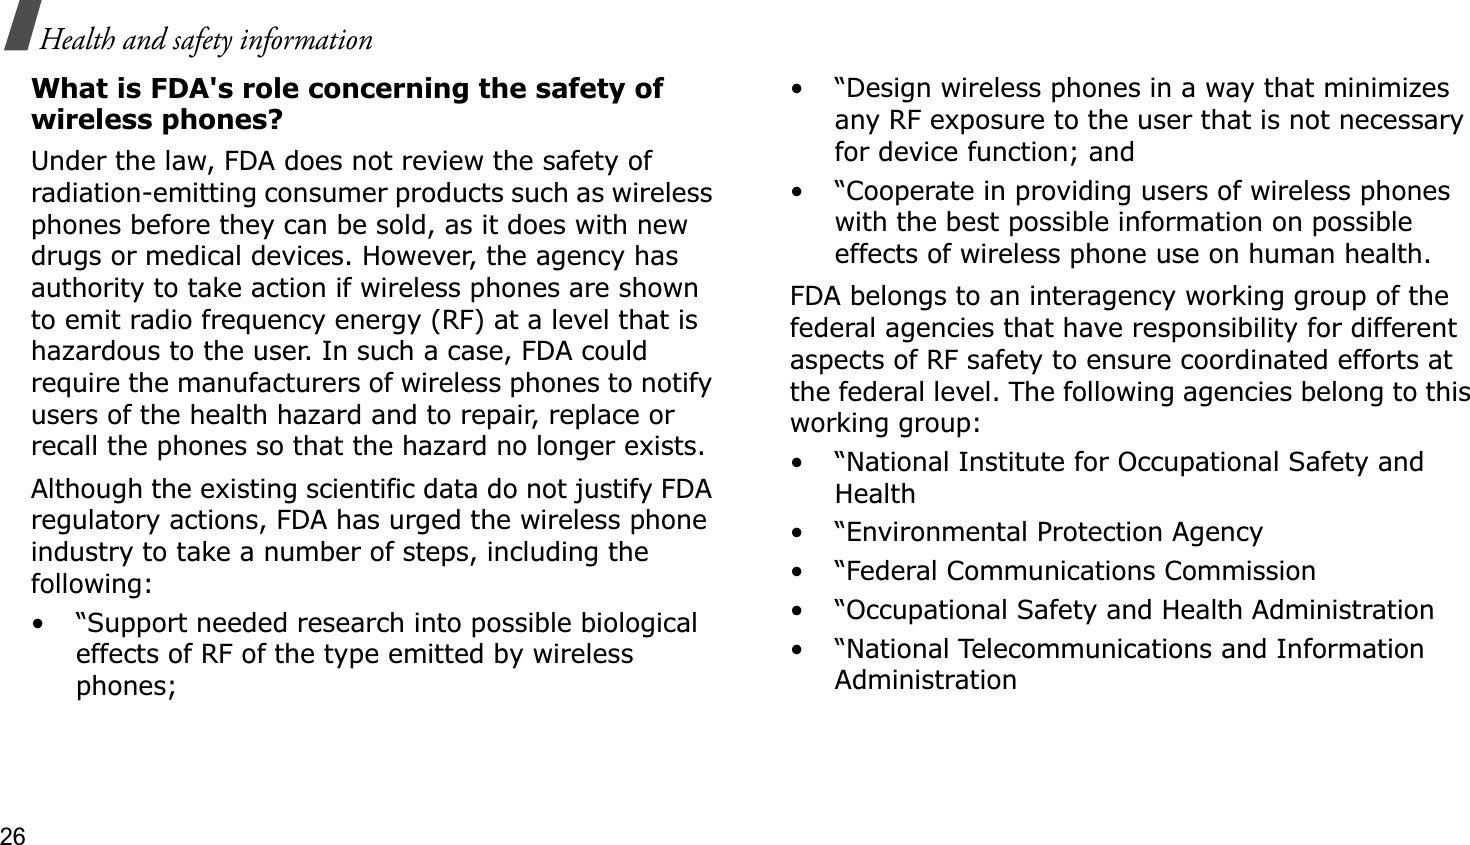 26Health and safety informationWhat is FDA&apos;s role concerning the safety of wireless phones?Under the law, FDA does not review the safety of radiation-emitting consumer products such as wireless phones before they can be sold, as it does with new drugs or medical devices. However, the agency has authority to take action if wireless phones are shown to emit radio frequency energy (RF) at a level that is hazardous to the user. In such a case, FDA could require the manufacturers of wireless phones to notify users of the health hazard and to repair, replace or recall the phones so that the hazard no longer exists.Although the existing scientific data do not justify FDA regulatory actions, FDA has urged the wireless phone industry to take a number of steps, including the following:• “Support needed research into possible biological effects of RF of the type emitted by wireless phones;• “Design wireless phones in a way that minimizes any RF exposure to the user that is not necessary for device function; and• “Cooperate in providing users of wireless phones with the best possible information on possible effects of wireless phone use on human health.FDA belongs to an interagency working group of the federal agencies that have responsibility for different aspects of RF safety to ensure coordinated efforts at the federal level. The following agencies belong to this working group:• “National Institute for Occupational Safety and Health• “Environmental Protection Agency• “Federal Communications Commission• “Occupational Safety and Health Administration• “National Telecommunications and Information Administration